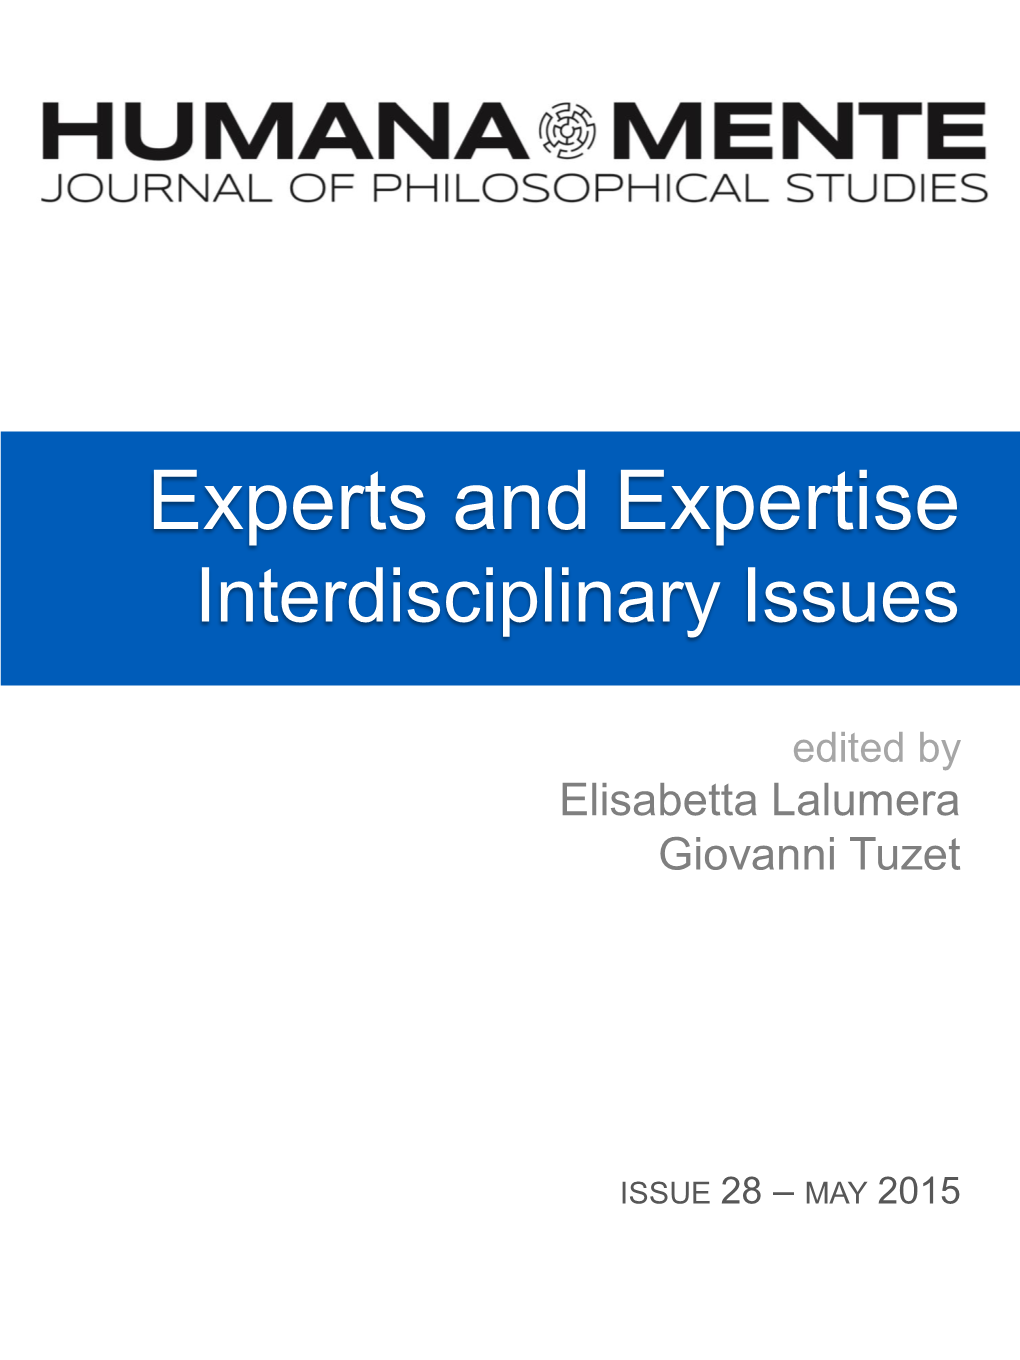 Experts and Expertise Interdisciplinary Issues